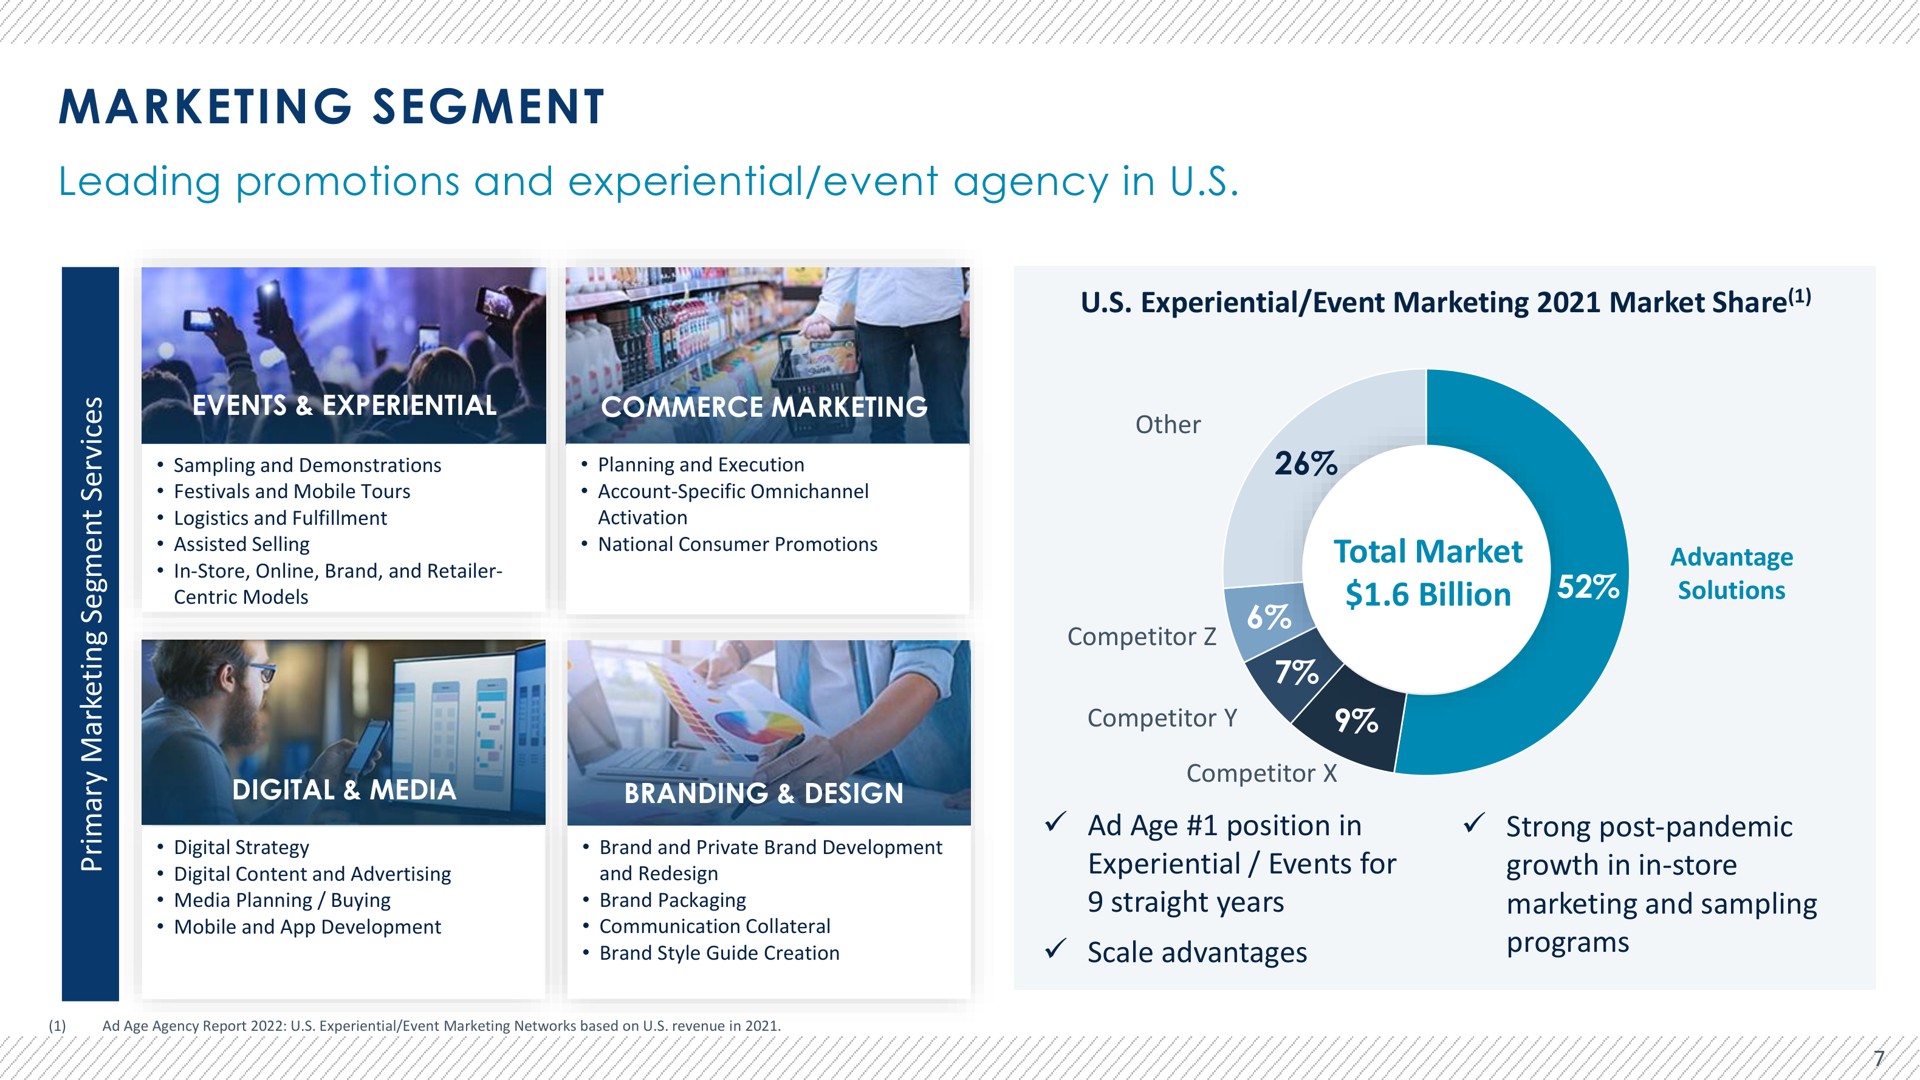 marketing segment leading promotions and experiential event agency in total market billion | Advantage Solutions